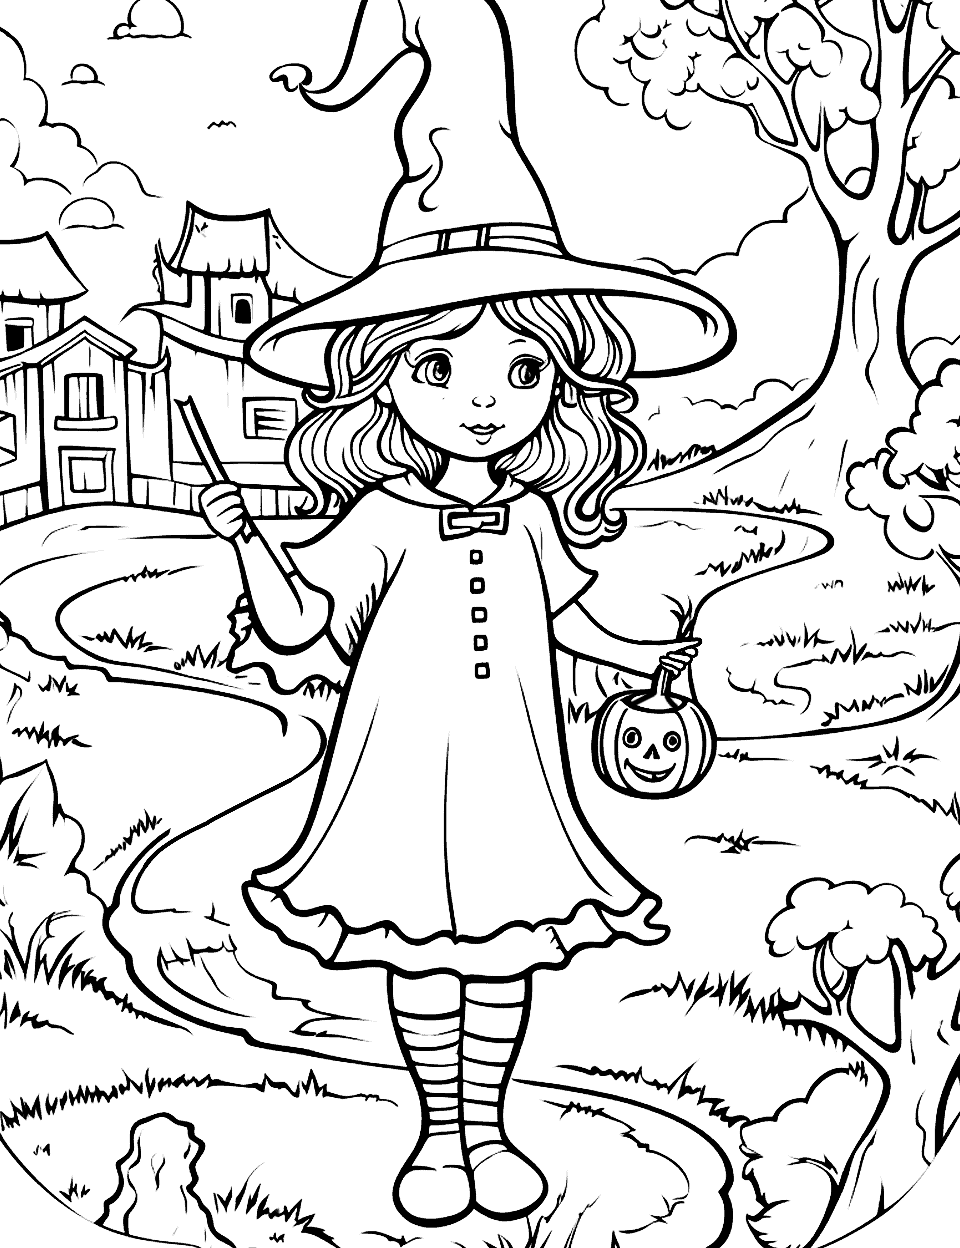 Witch's Treasure Hunt Witch Coloring Page - A witch searching for treasure with a map in a mystical land.